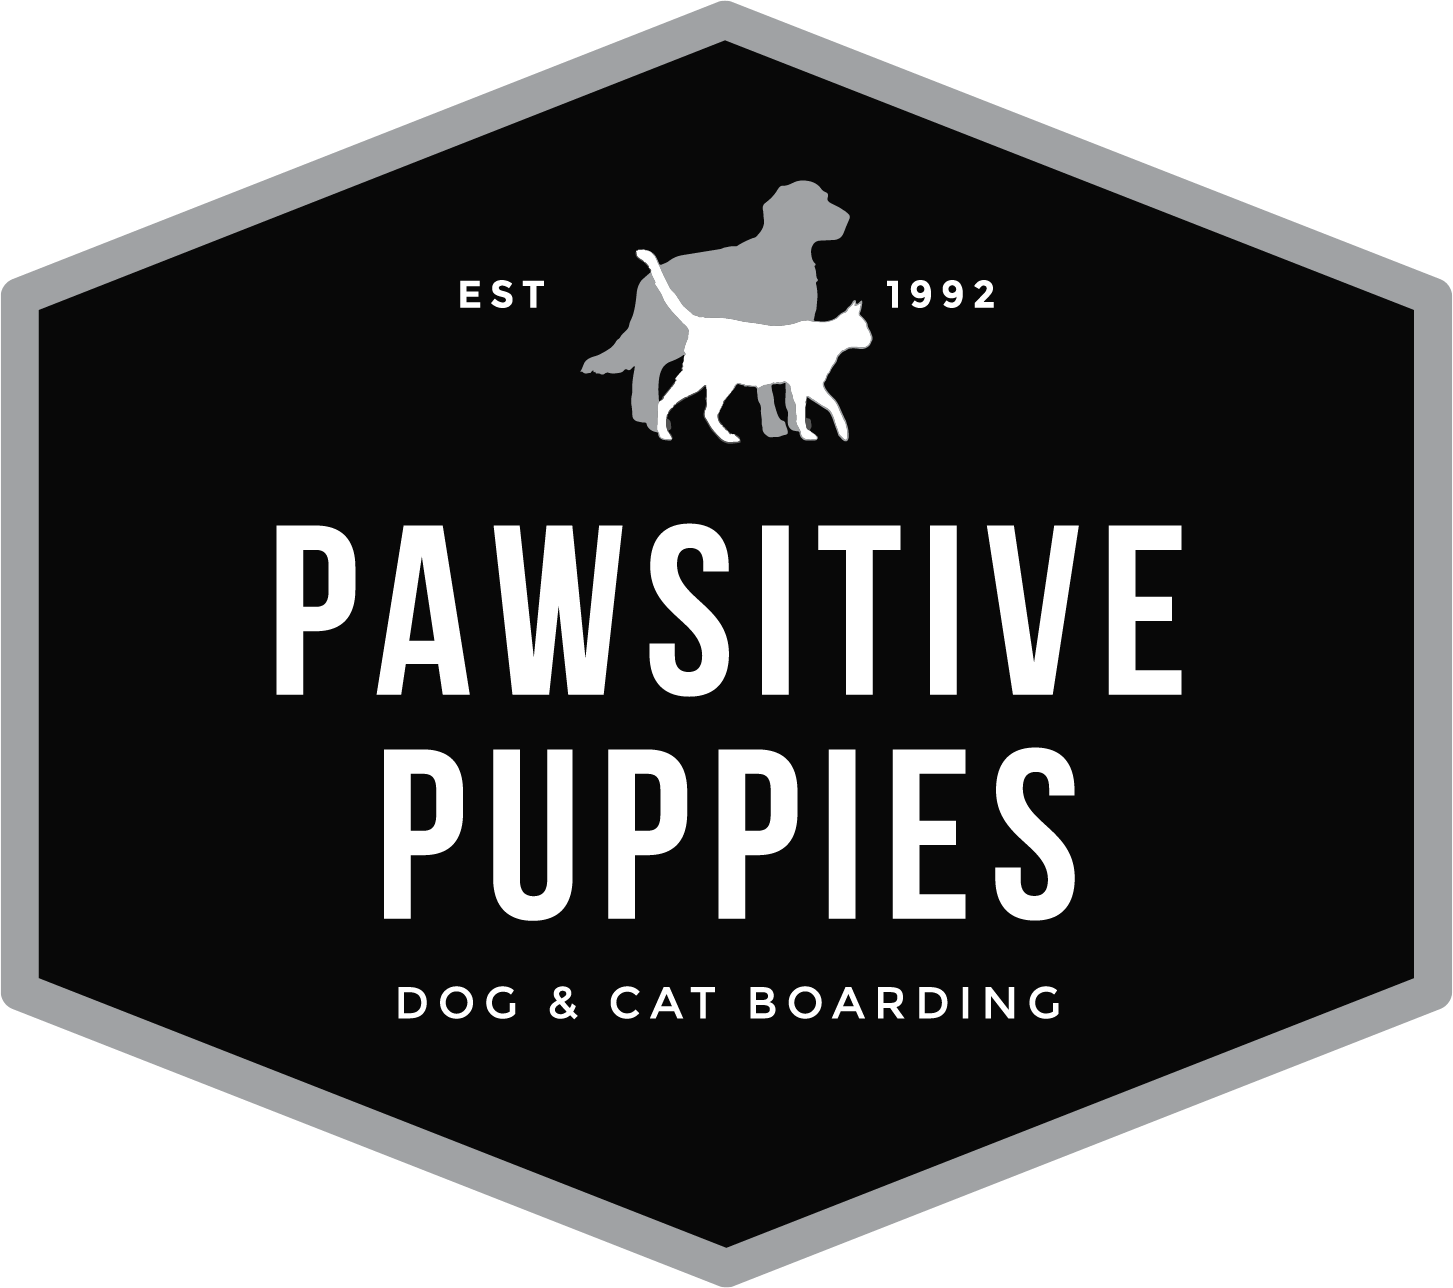 PAWSITIVE PUPPIES